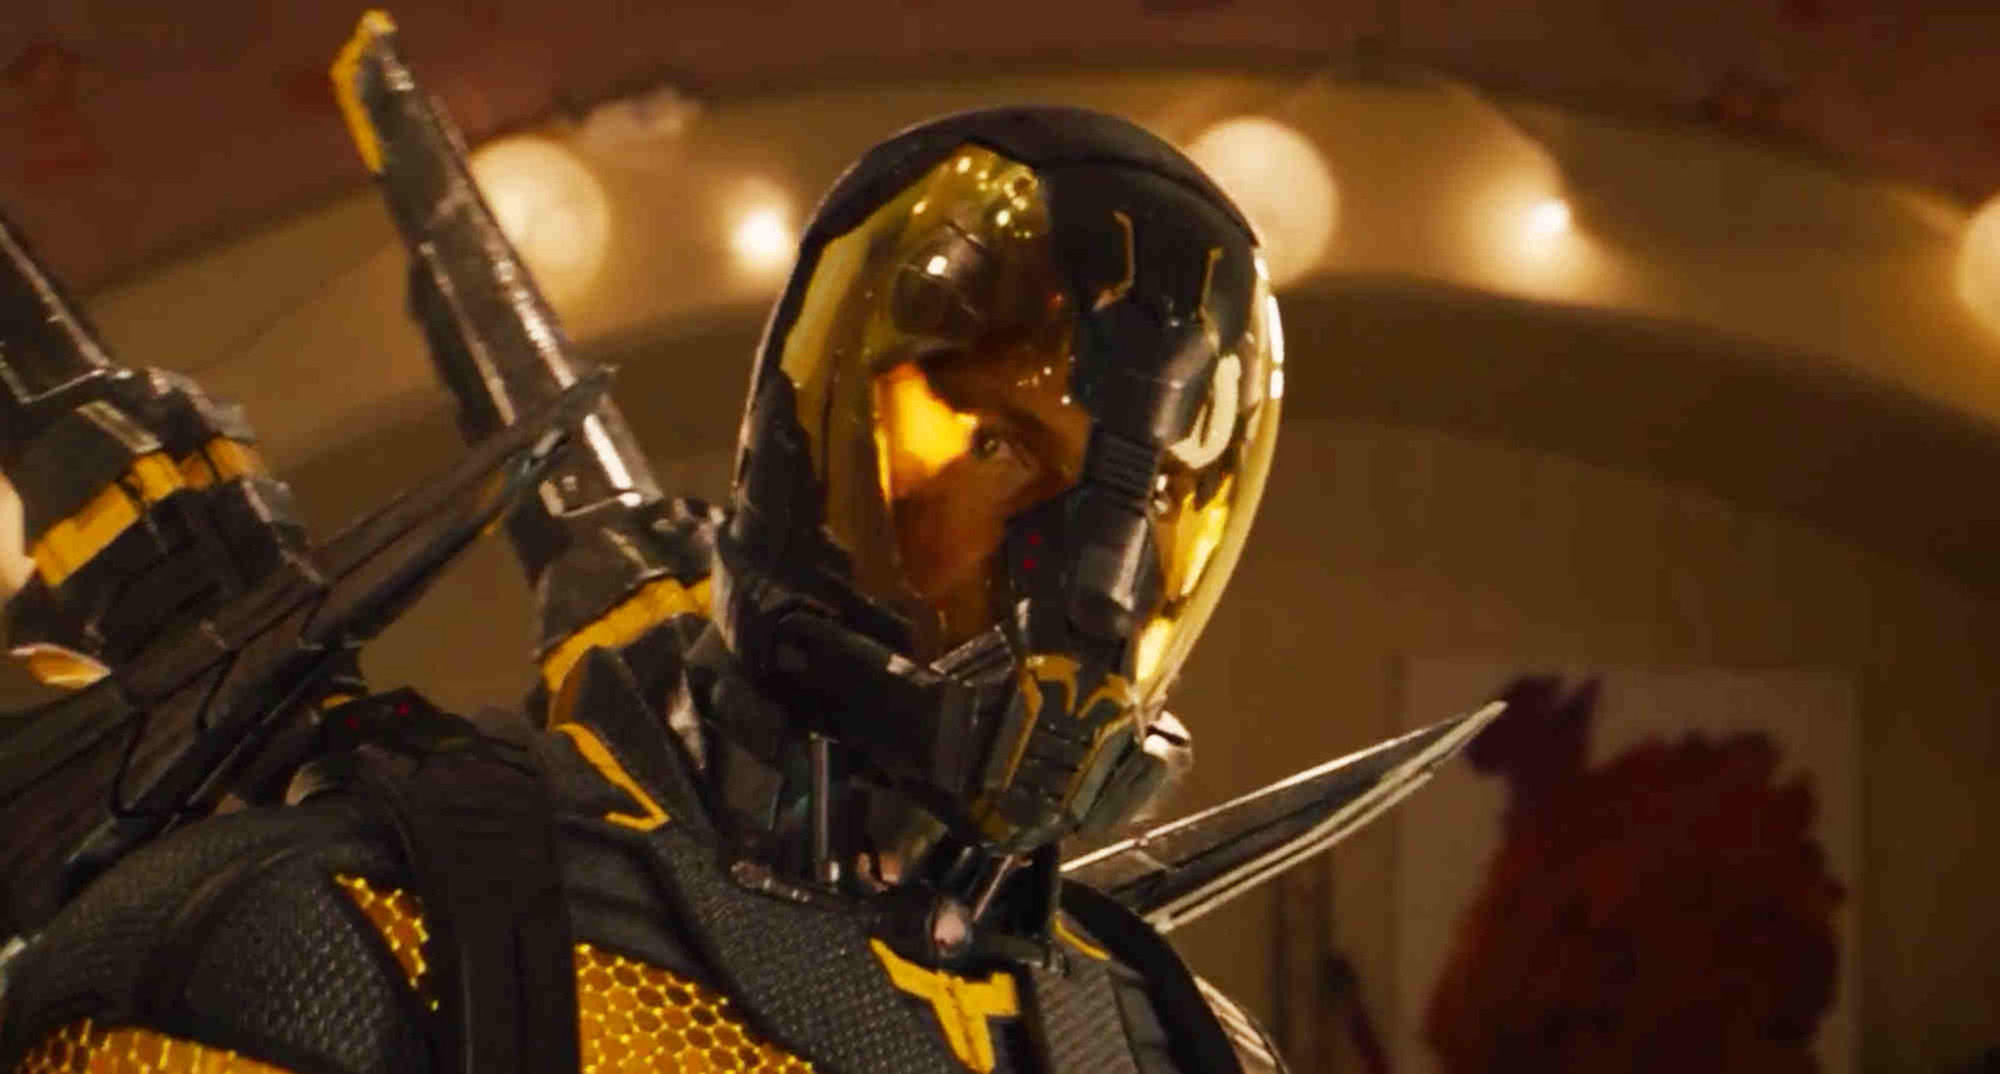  as Yellowjacket in the new Marvels Ant Man trailer   LIONHEARTV